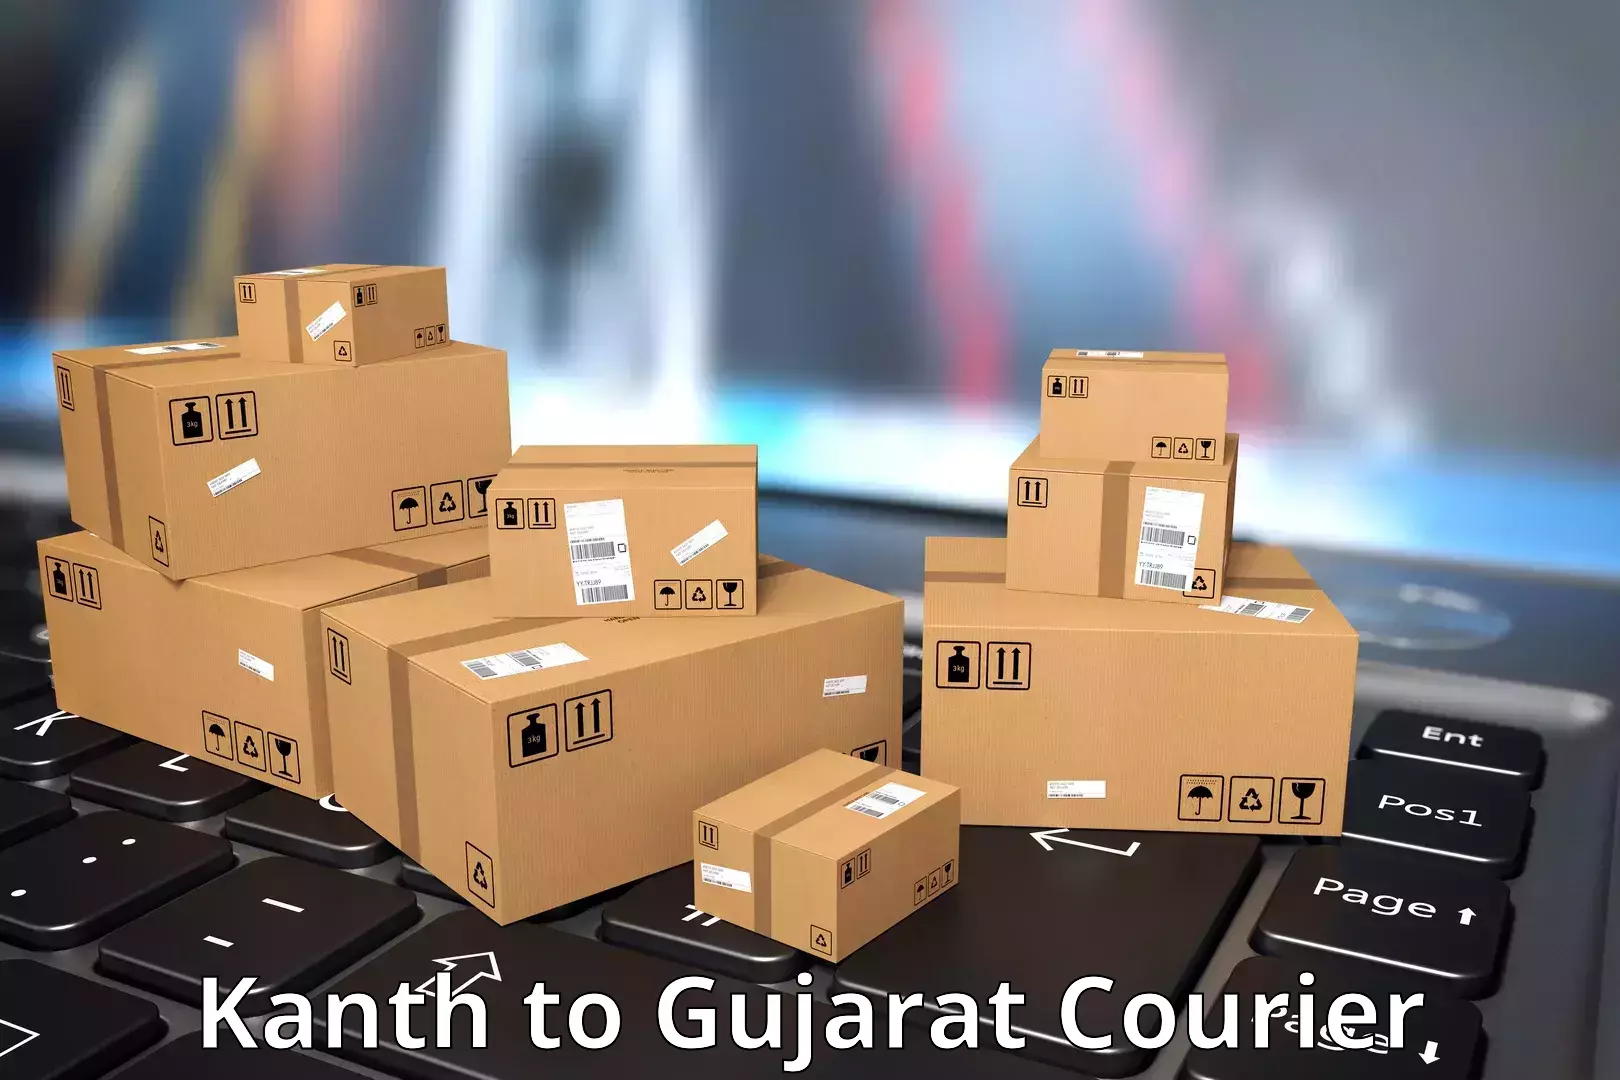 Cost-effective shipping solutions Kanth to Sanand